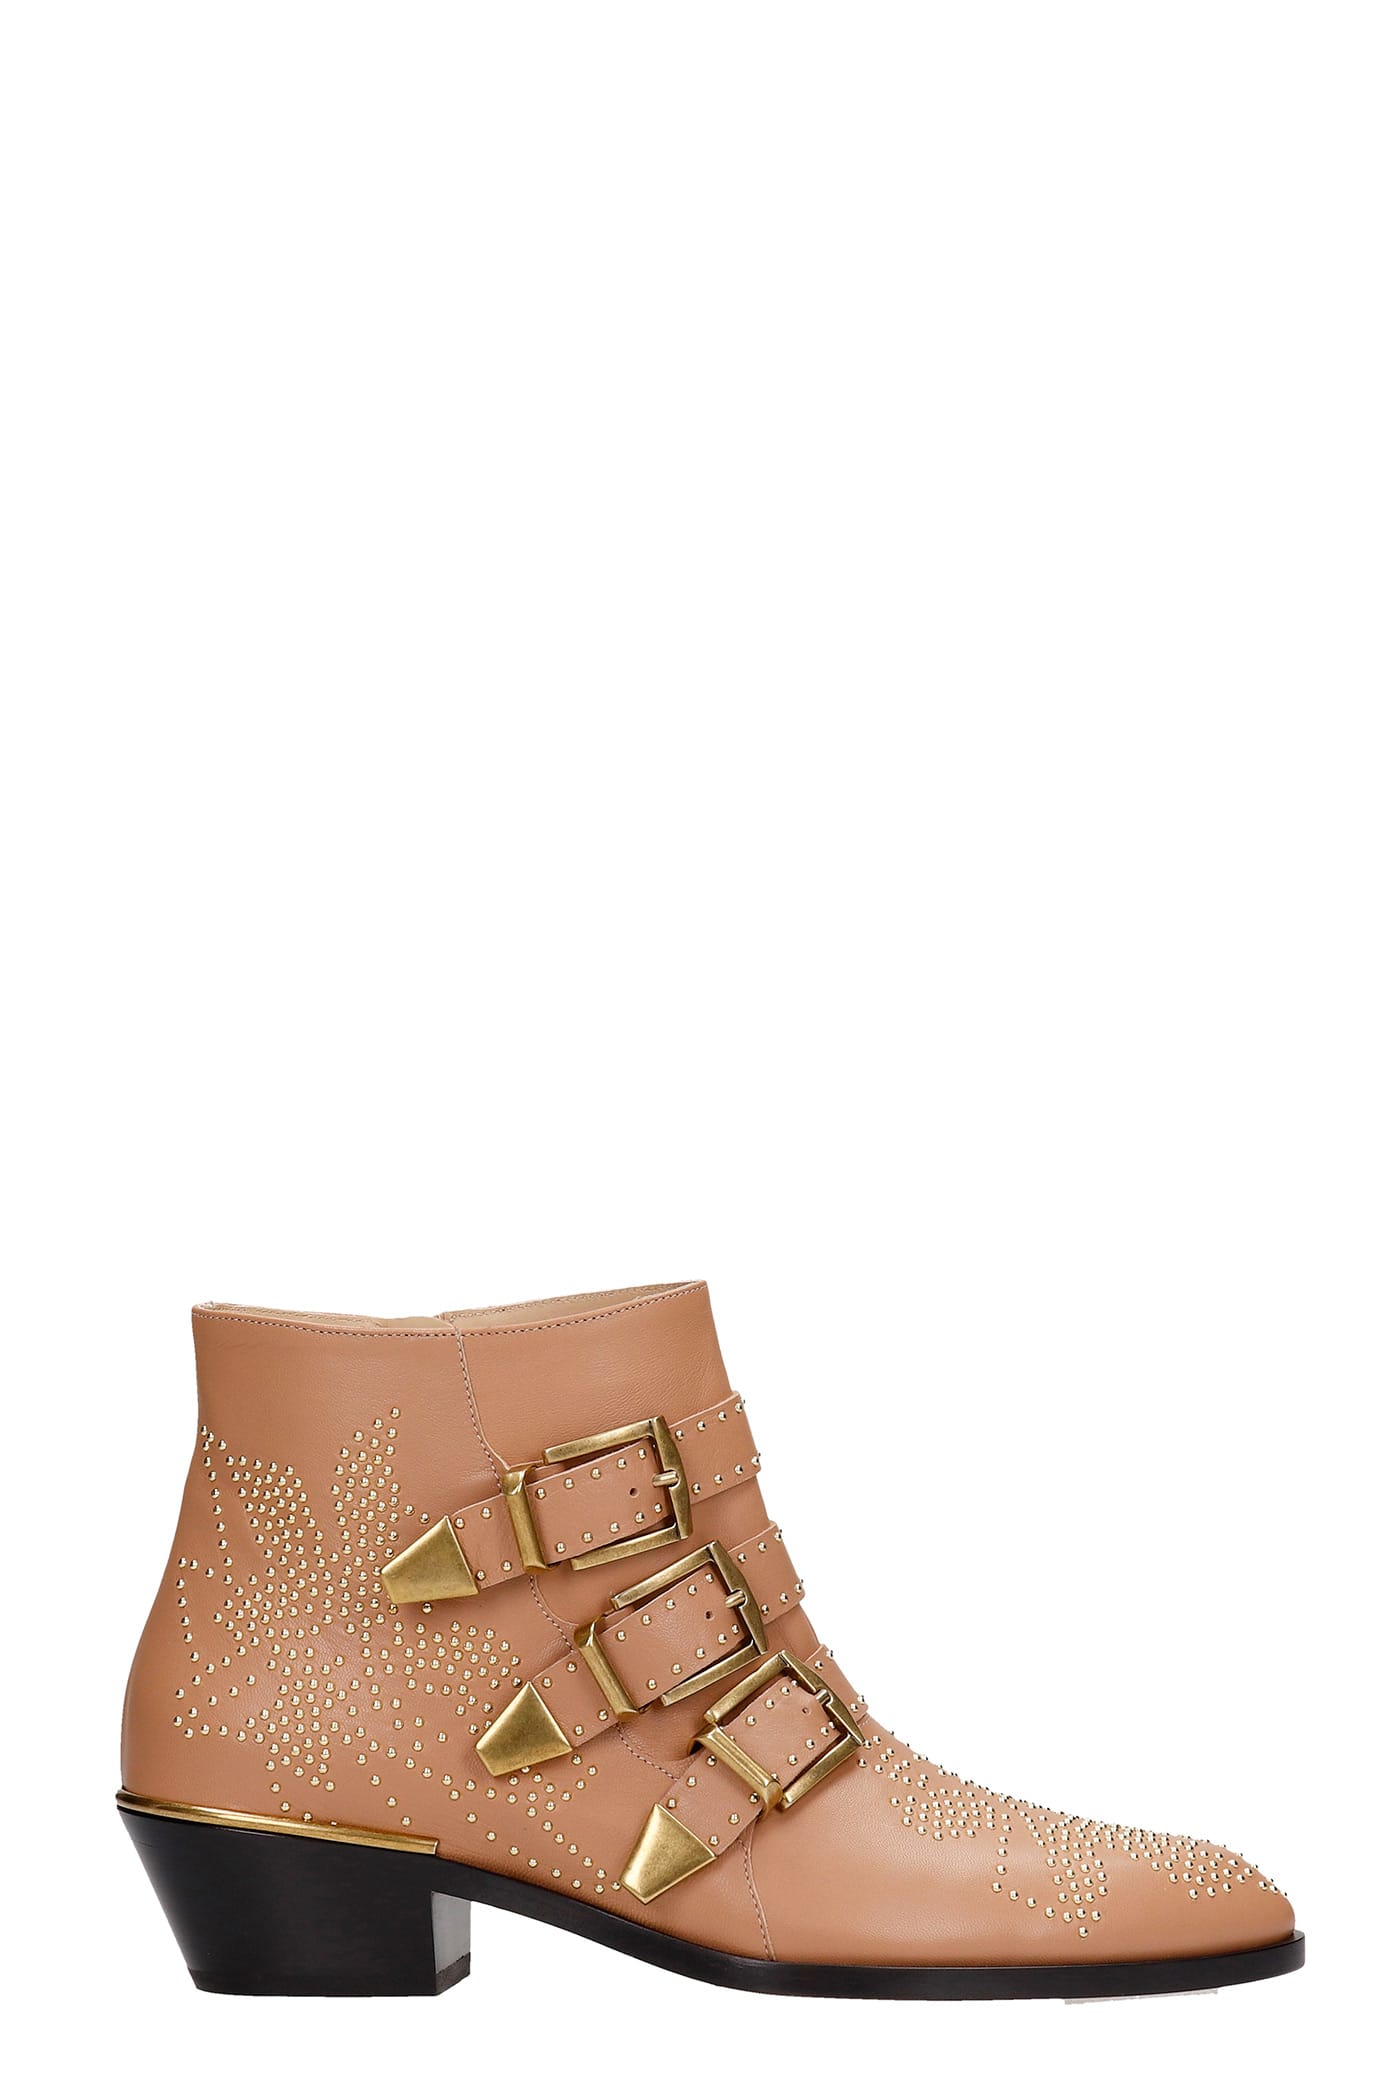 CHLOÉ CHLOÉ SUSANNA LOW HEELS ANKLE BOOTS IN POWDER LEATHER,CHC16A1347526U